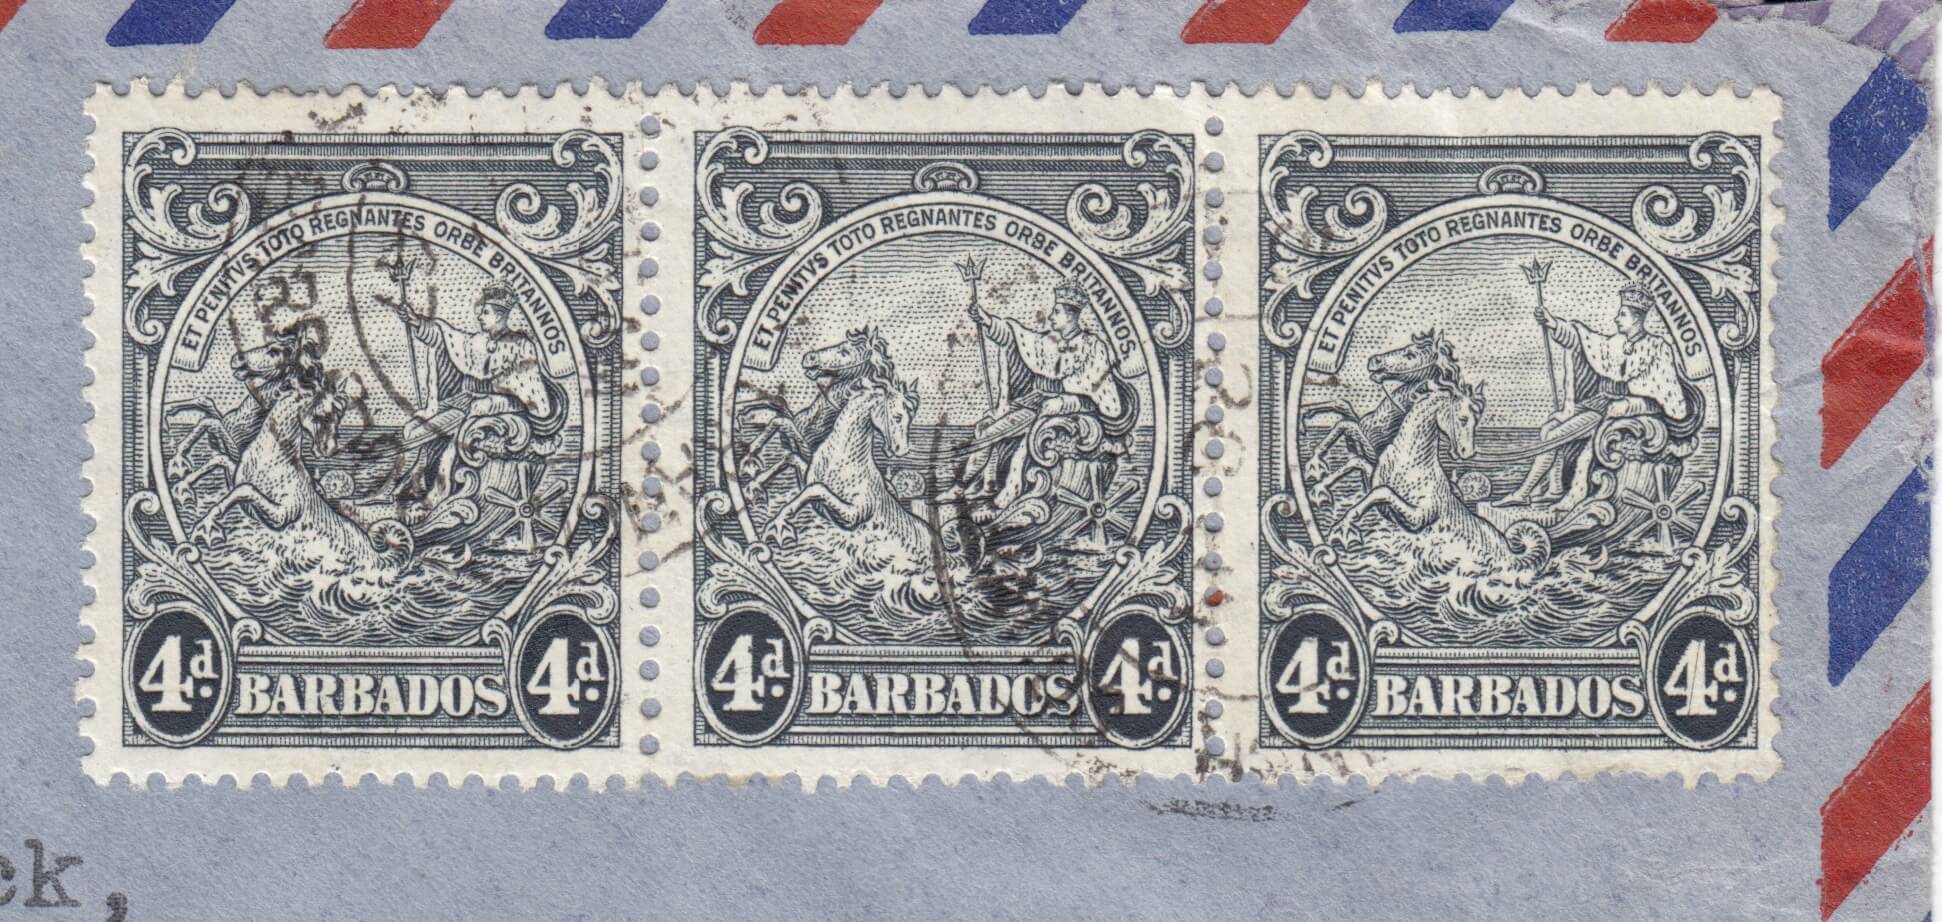 Barbados SG253c 4d Black cracked plate flaw on cover